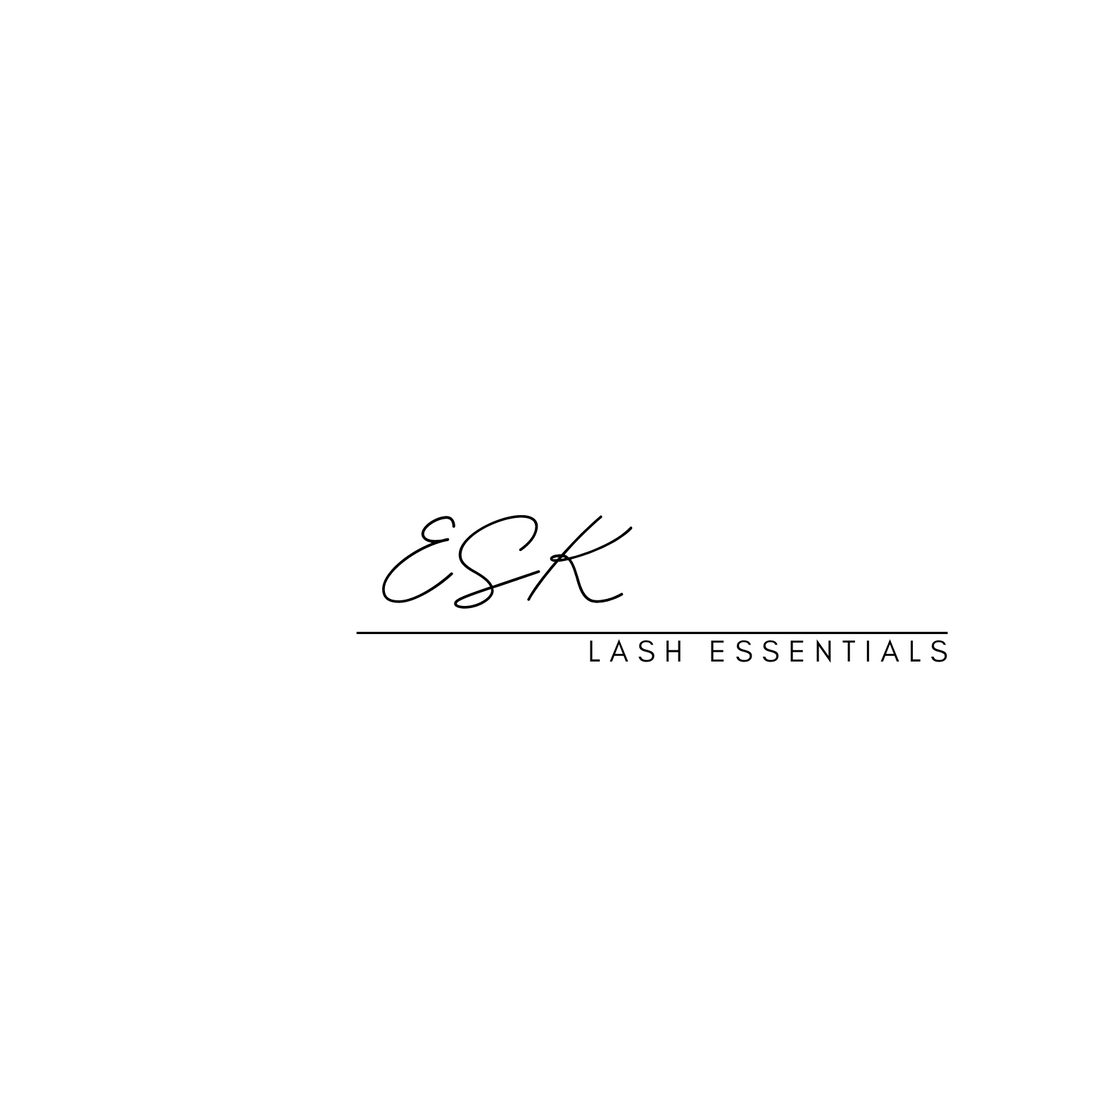 The Art of Eyelash Extension styling: Creating Custom Looks | ESK eyelash extension products and supplies